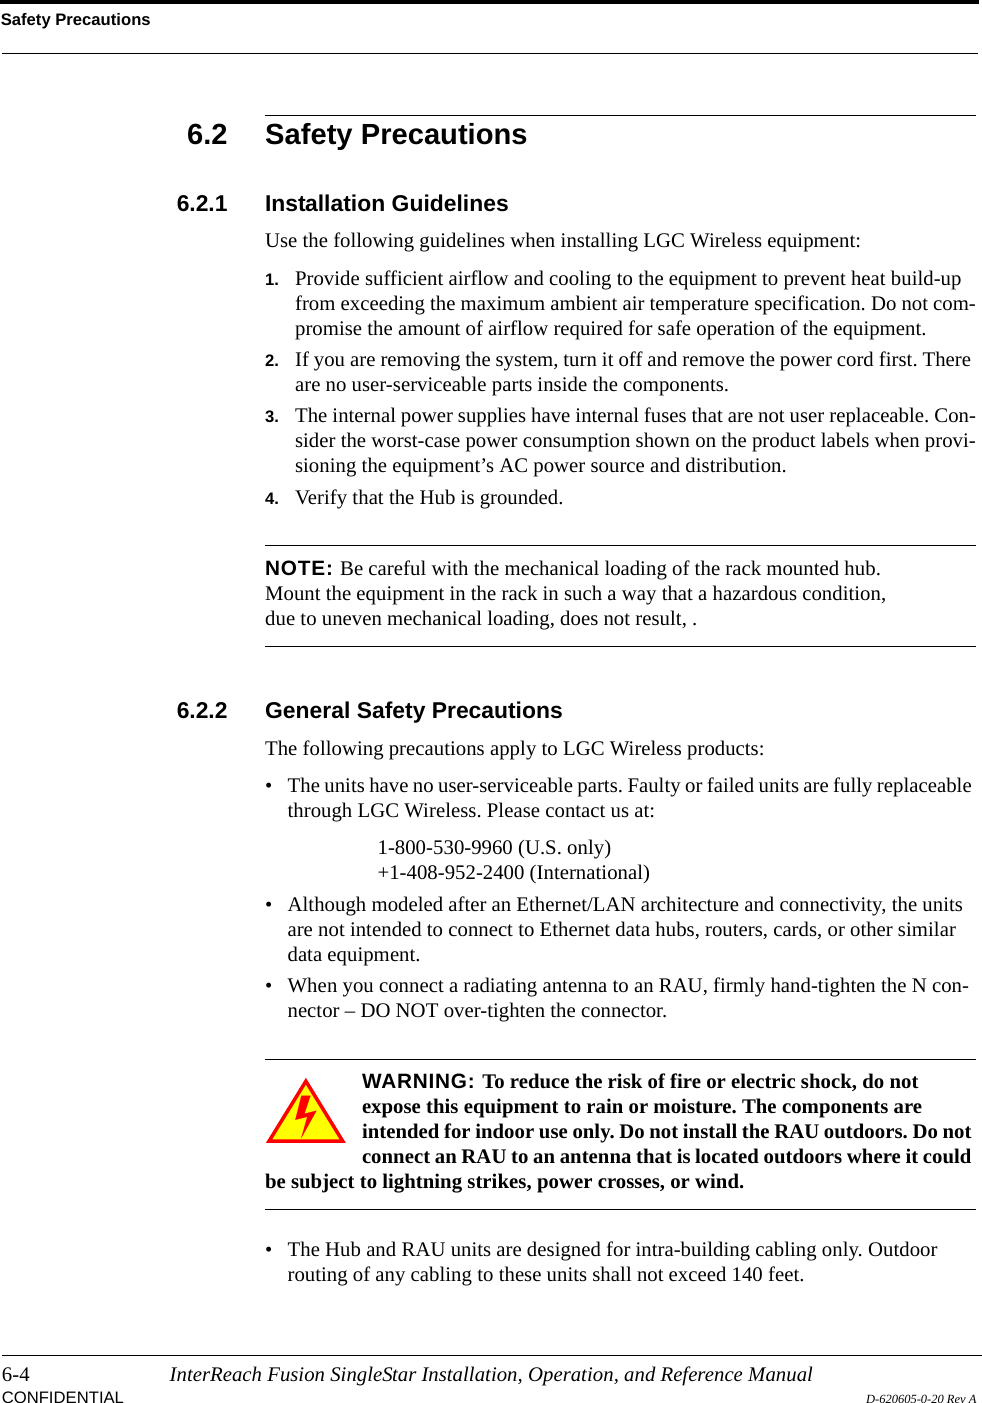 Safety Precautions6-4 InterReach Fusion SingleStar Installation, Operation, and Reference ManualCONFIDENTIAL D-620605-0-20 Rev A6.2 Safety Precautions6.2.1 Installation GuidelinesUse the following guidelines when installing LGC Wireless equipment:1. Provide sufficient airflow and cooling to the equipment to prevent heat build-up from exceeding the maximum ambient air temperature specification. Do not com-promise the amount of airflow required for safe operation of the equipment.2. If you are removing the system, turn it off and remove the power cord first. There are no user-serviceable parts inside the components.3. The internal power supplies have internal fuses that are not user replaceable. Con-sider the worst-case power consumption shown on the product labels when provi-sioning the equipment’s AC power source and distribution.4. Verify that the Hub is grounded.NOTE: Be careful with the mechanical loading of the rack mounted hub. Mount the equipment in the rack in such a way that a hazardous condition, due to uneven mechanical loading, does not result, .6.2.2 General Safety PrecautionsThe following precautions apply to LGC Wireless products:• The units have no user-serviceable parts. Faulty or failed units are fully replaceable through LGC Wireless. Please contact us at:1-800-530-9960 (U.S. only)+1-408-952-2400 (International)• Although modeled after an Ethernet/LAN architecture and connectivity, the units are not intended to connect to Ethernet data hubs, routers, cards, or other similar data equipment.• When you connect a radiating antenna to an RAU, firmly hand-tighten the N con-nector – DO NOT over-tighten the connector.WARNING: To reduce the risk of fire or electric shock, do not expose this equipment to rain or moisture. The components are intended for indoor use only. Do not install the RAU outdoors. Do not connect an RAU to an antenna that is located outdoors where it could be subject to lightning strikes, power crosses, or wind.• The Hub and RAU units are designed for intra-building cabling only. Outdoor routing of any cabling to these units shall not exceed 140 feet.